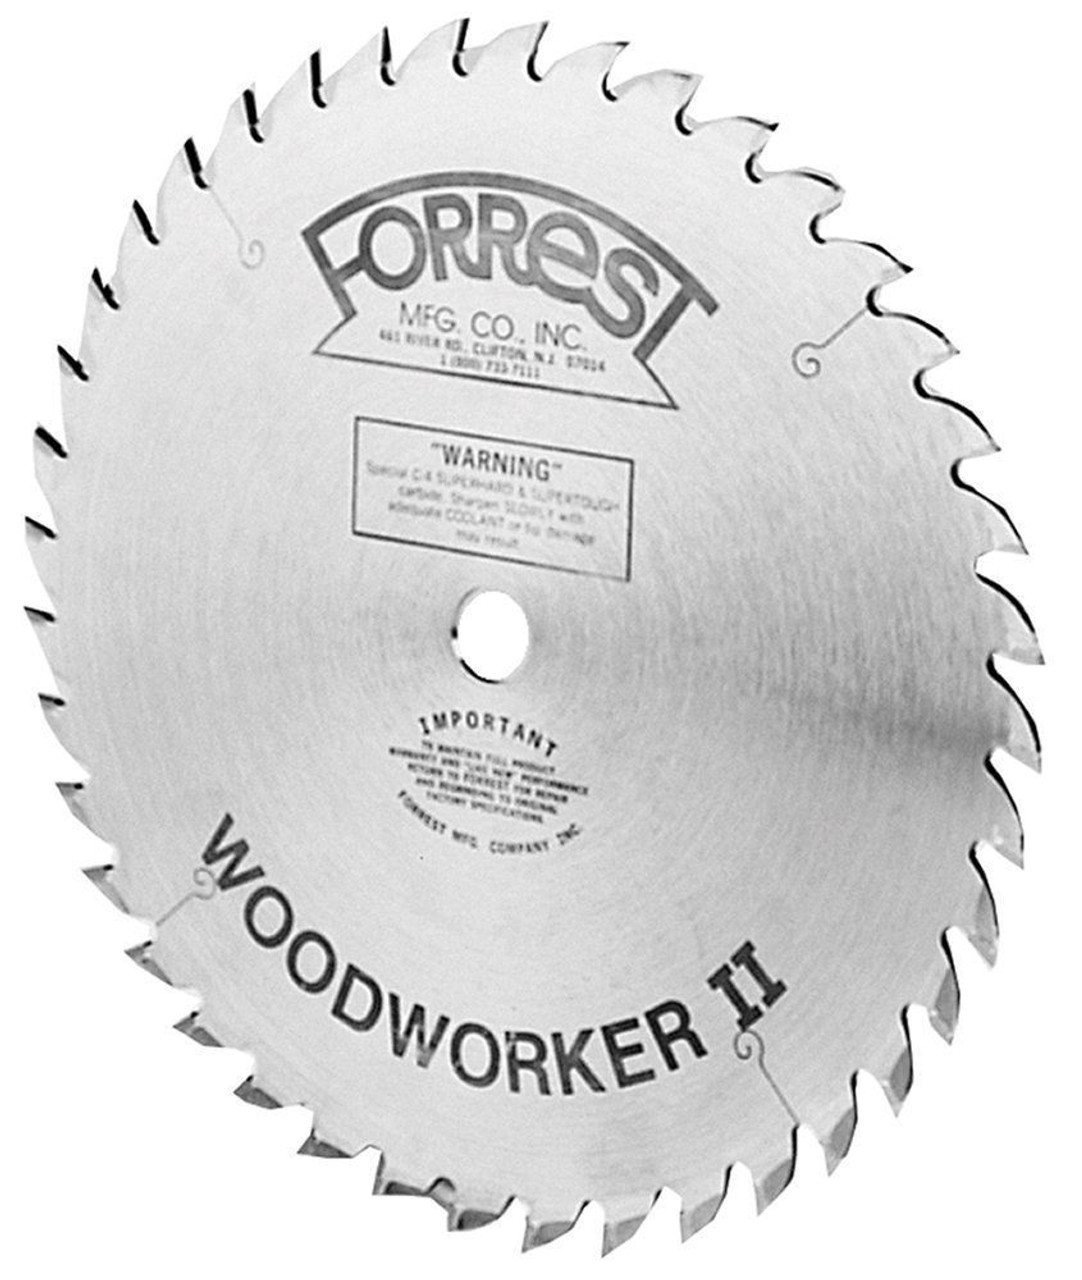 Forrest WW10407100 Woodworker II 10-Inch 40-tooth ATB .100 Kerf Saw Blade with 5/8 inch Bore